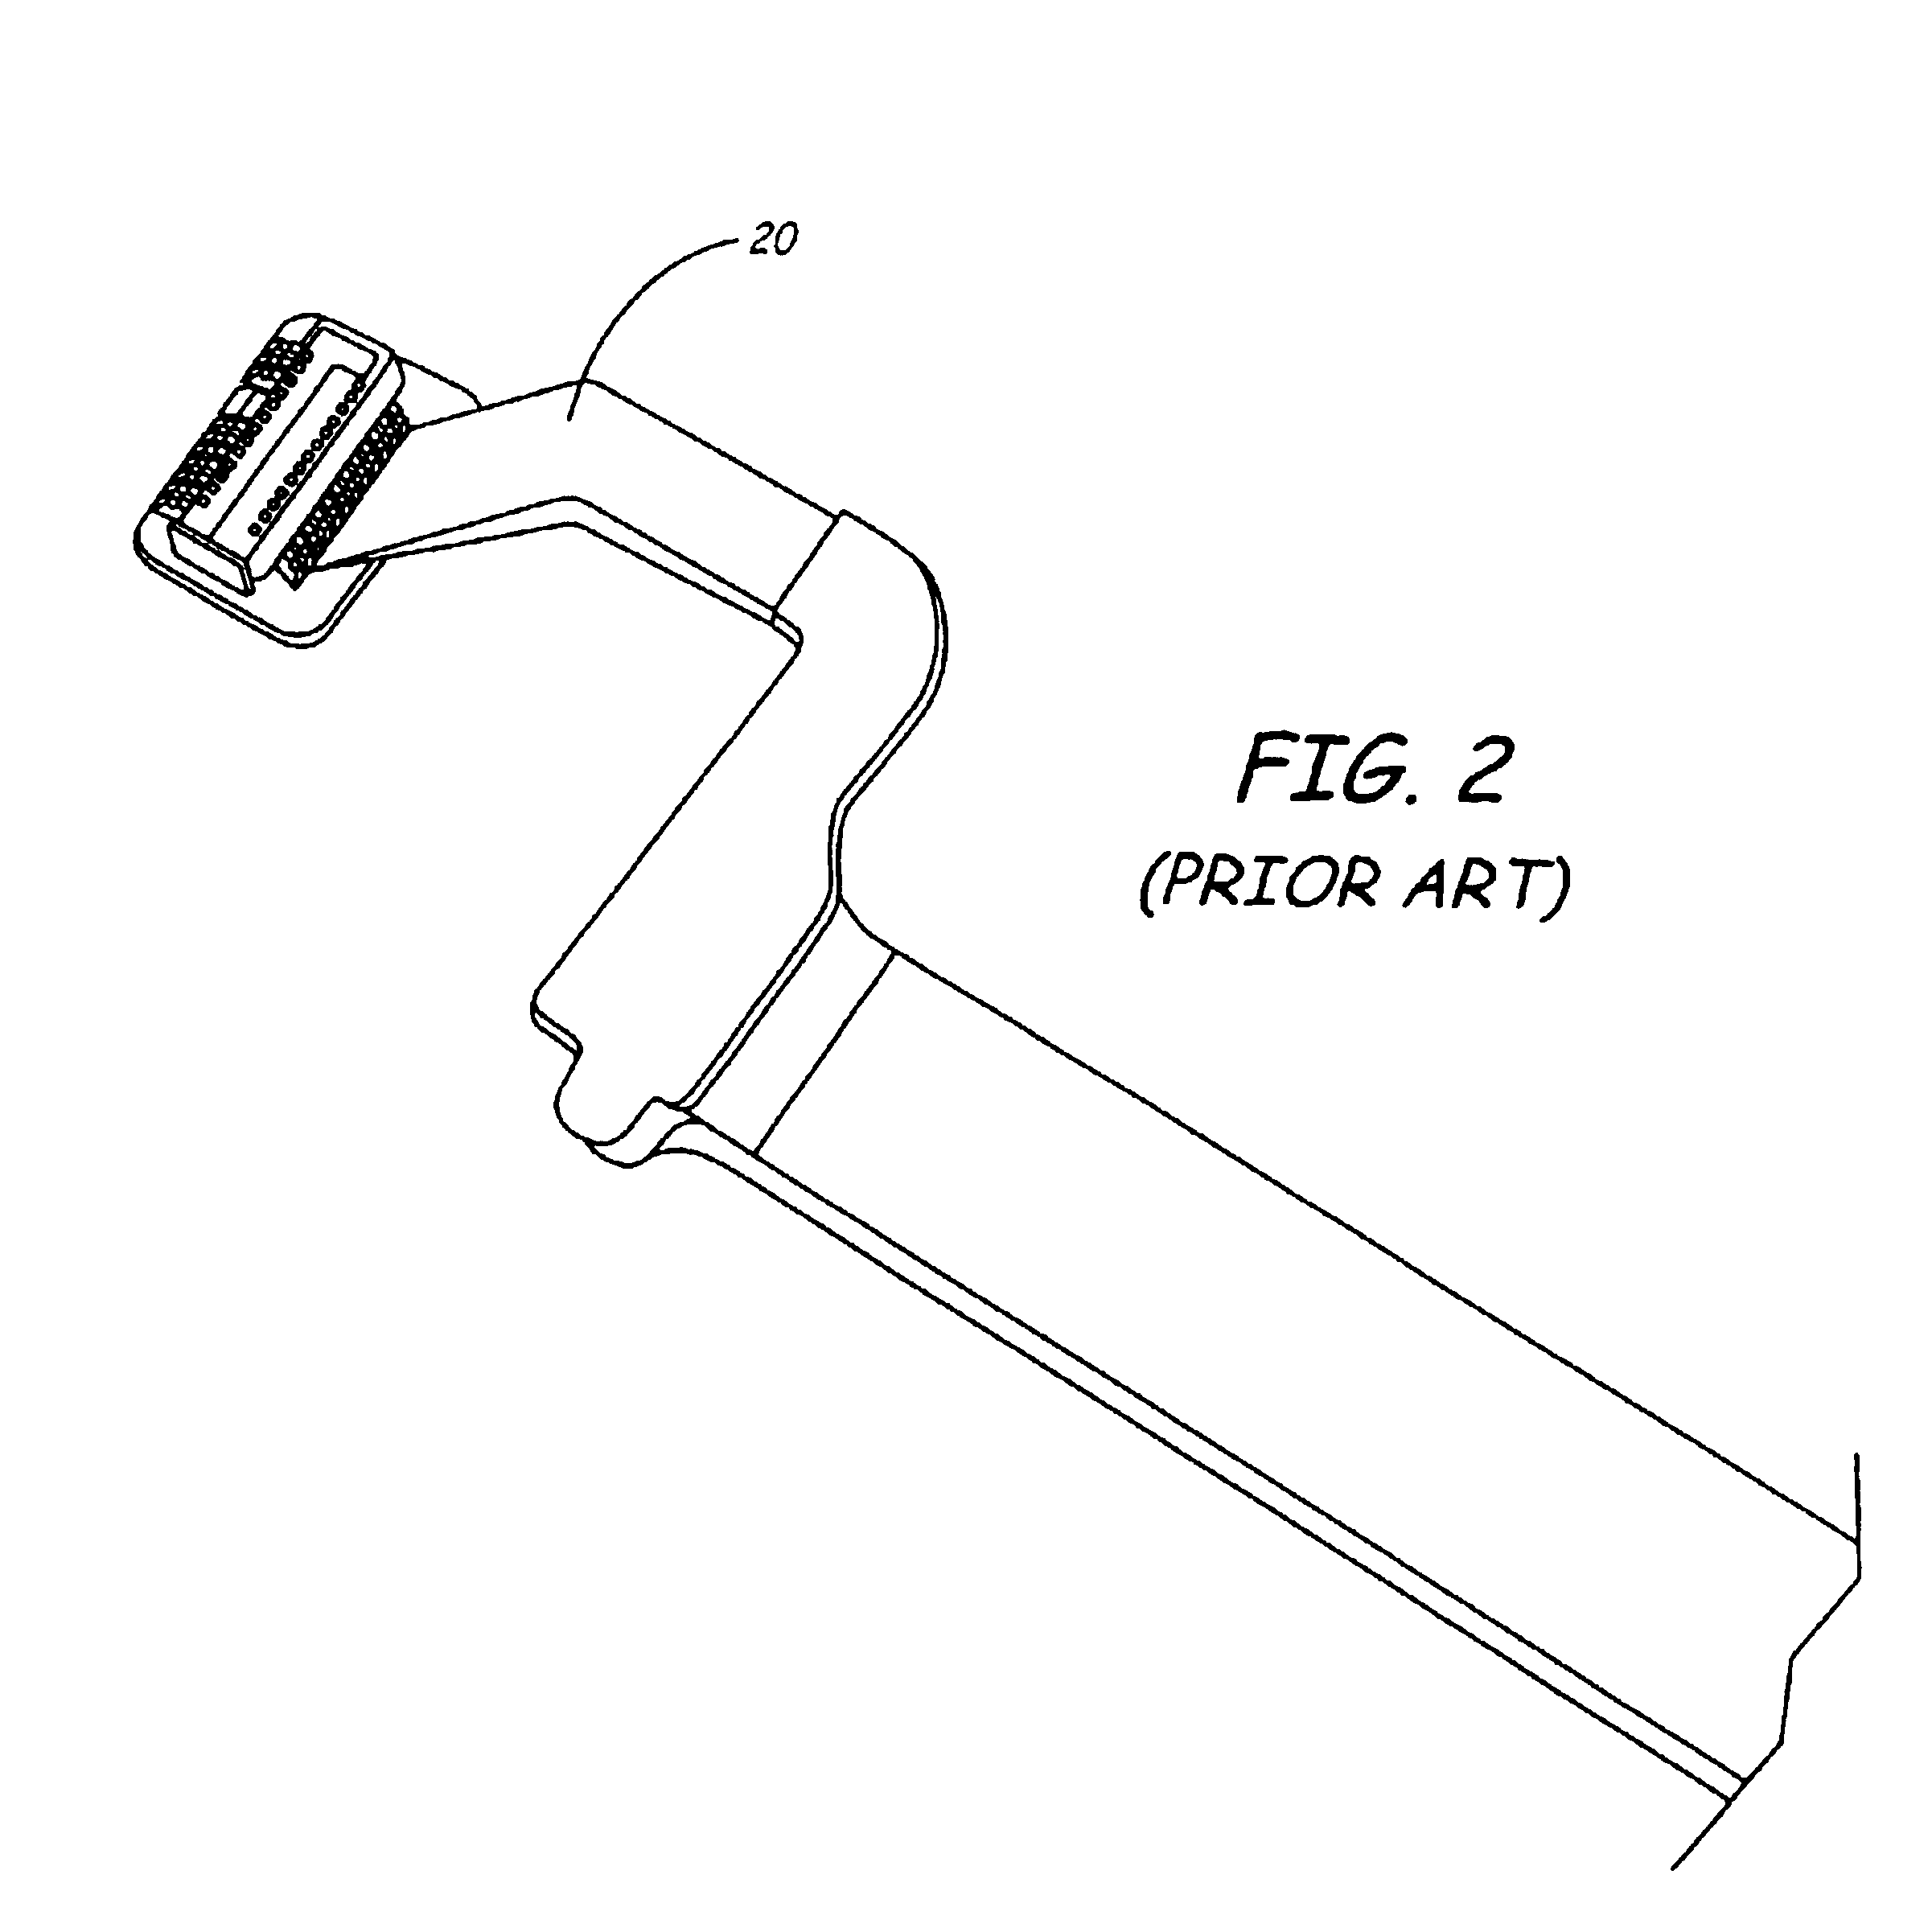 Micro connector to facilitate testing of micro electronic component and subassemblies